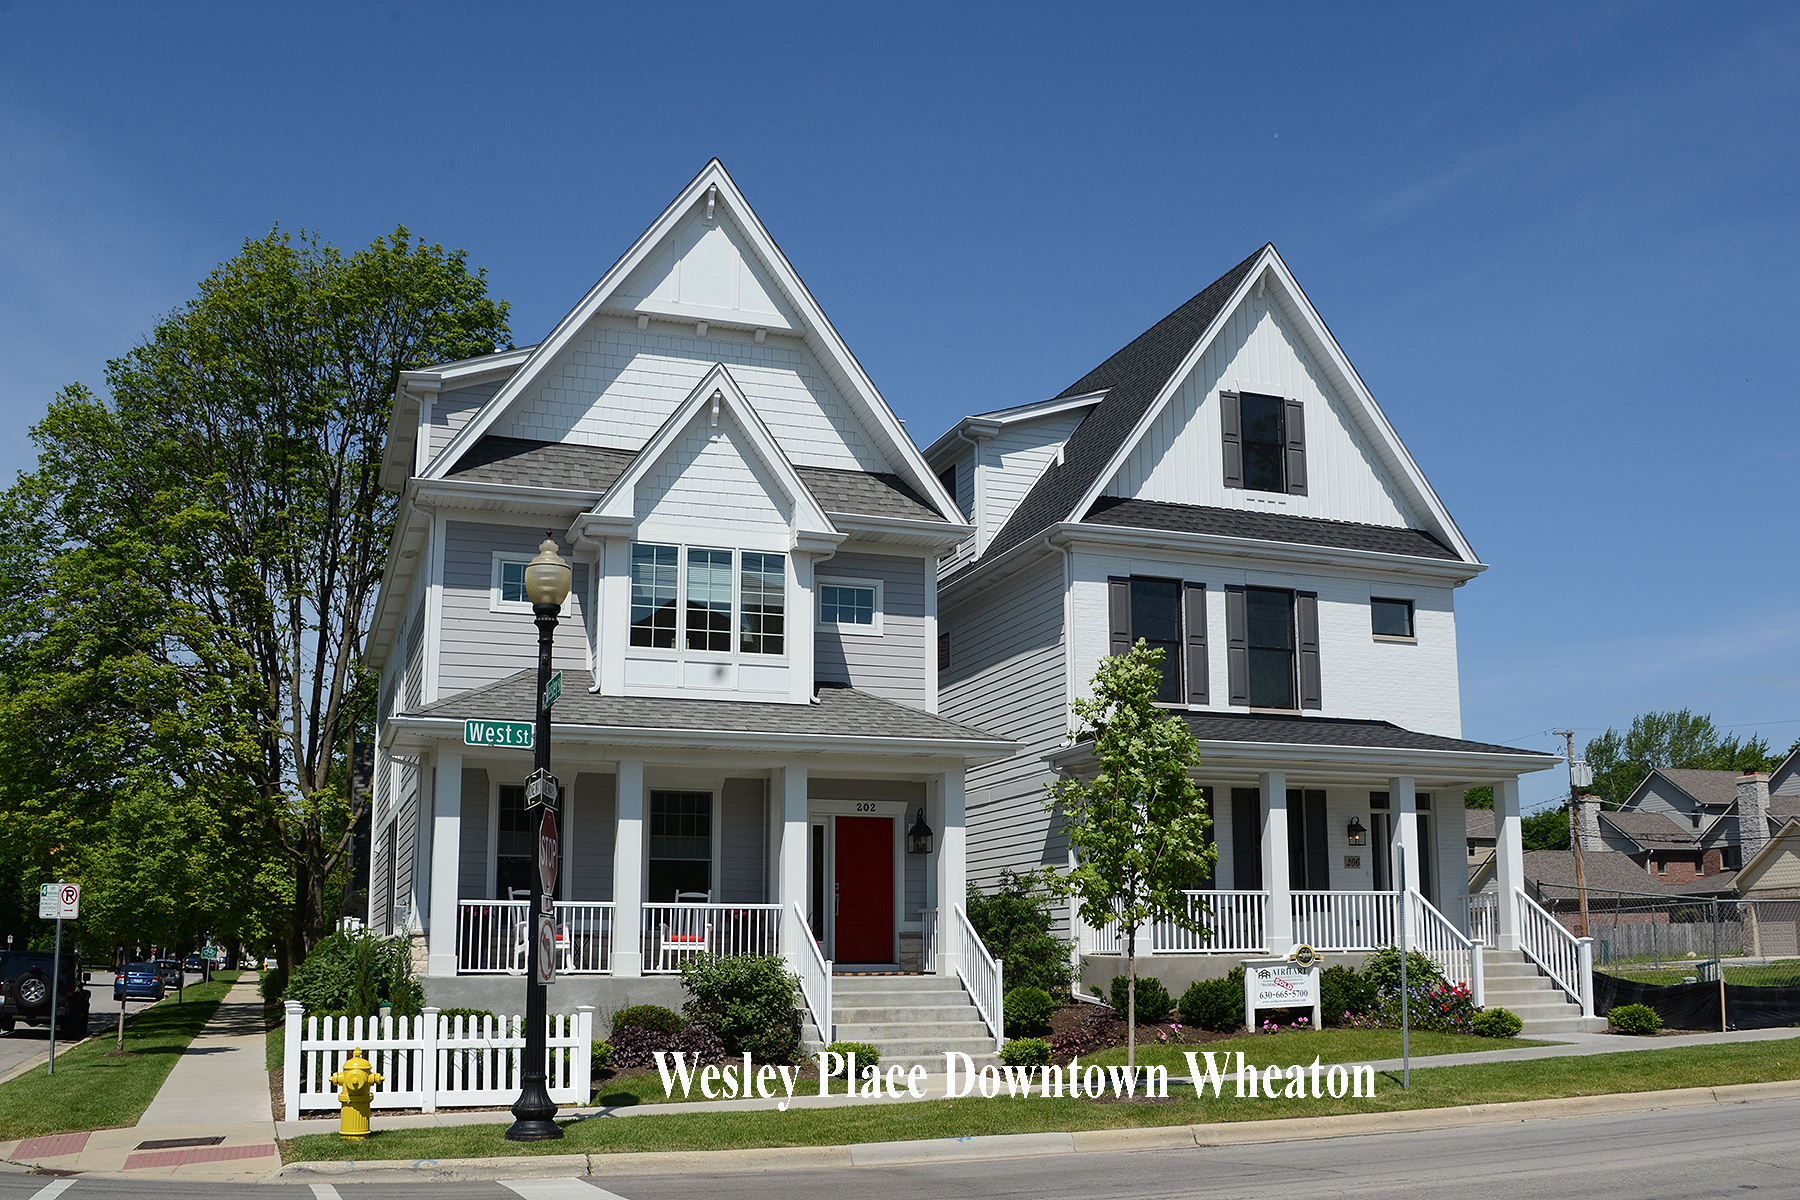 Wesley Place custom homes downtown Wheaton by Airhart Construction